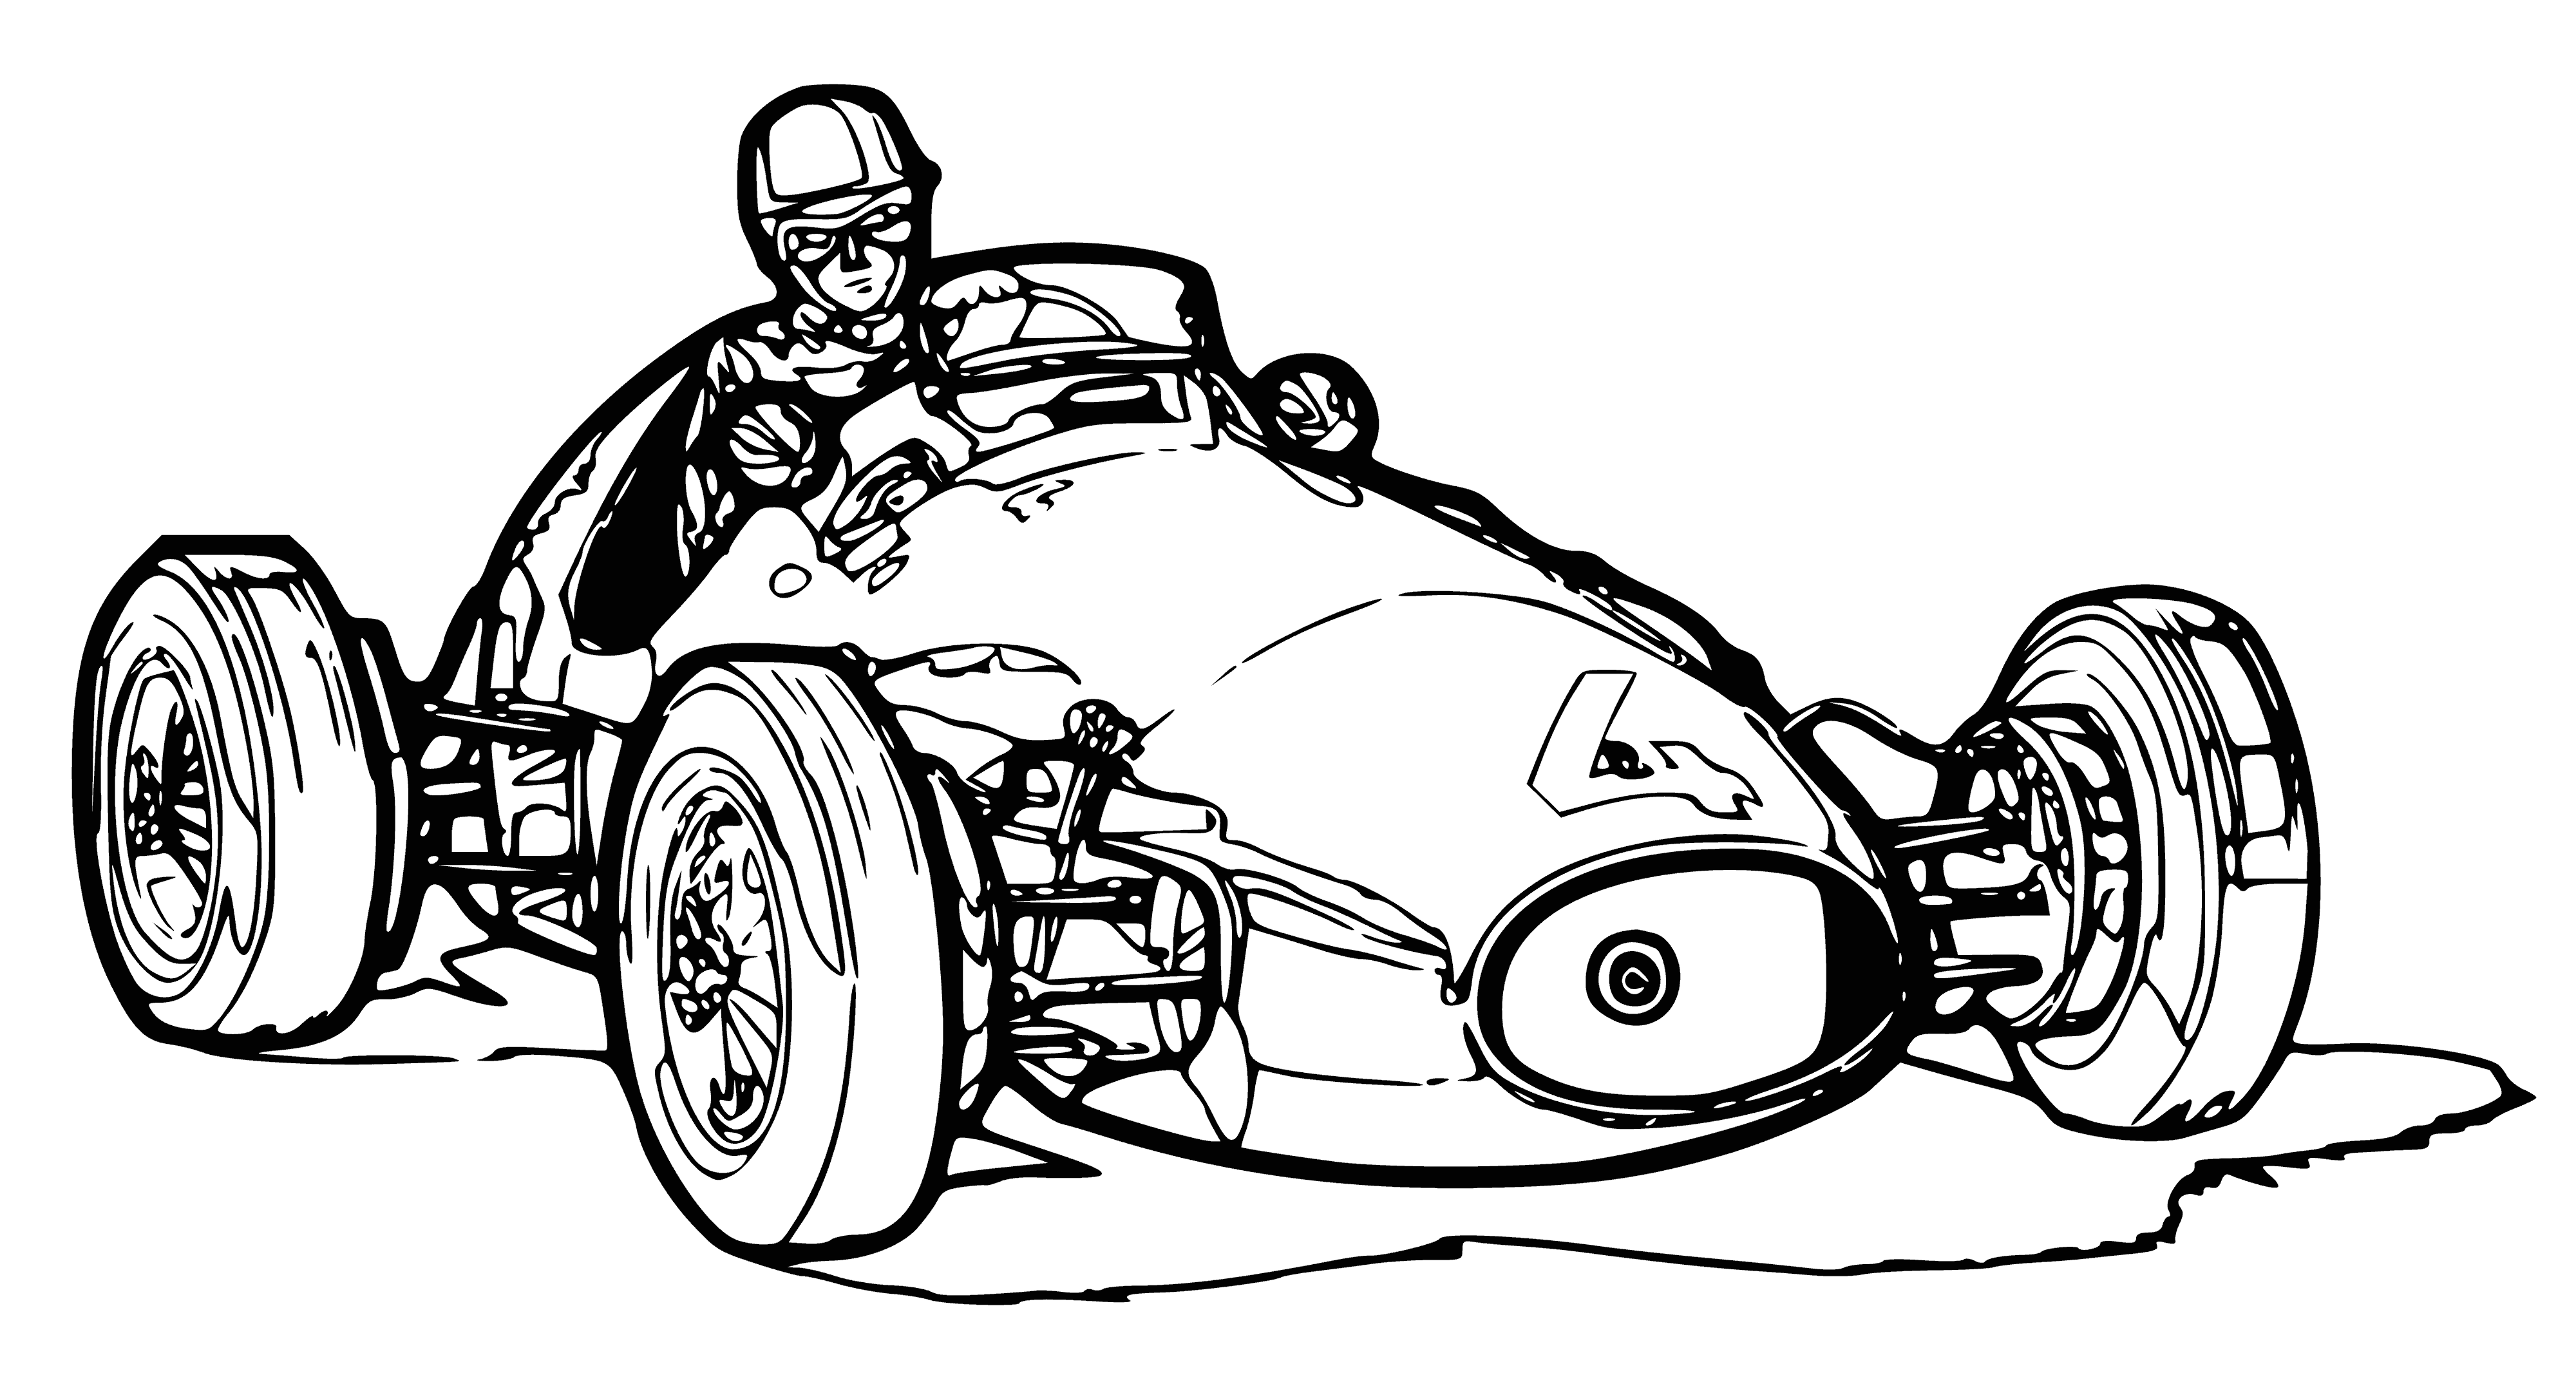 1952 coloring page